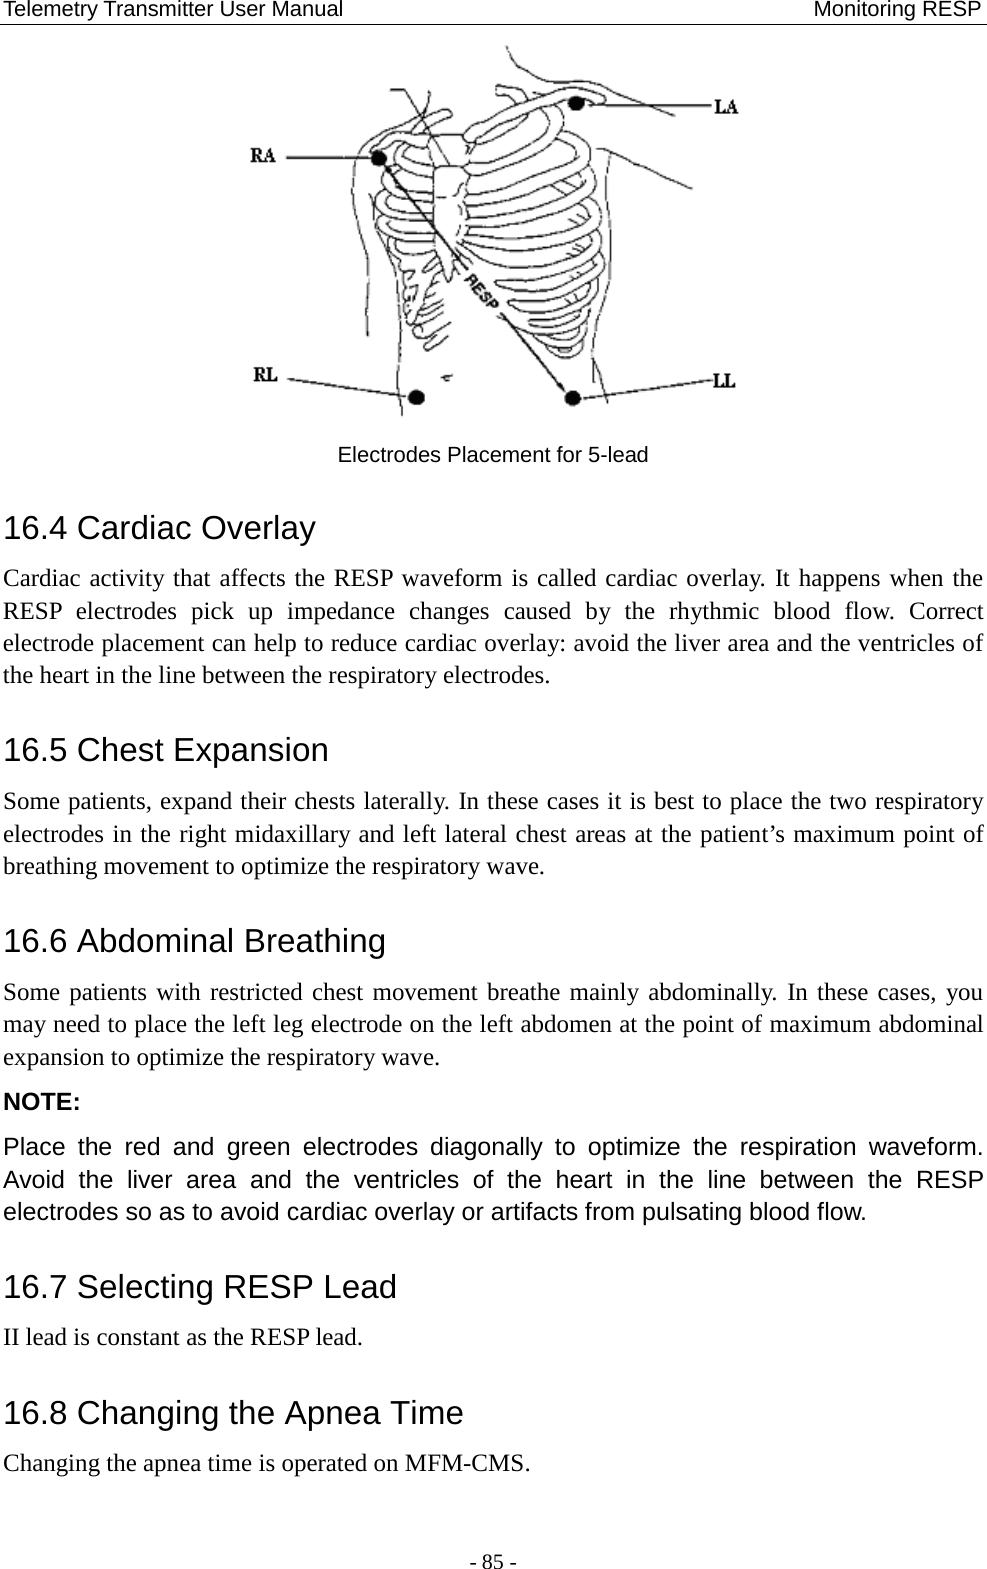 Telemetry Transmitter User Manual                                           Monitoring RESP  Electrodes Placement for 5-lead 16.4 Cardiac Overlay Cardiac activity that affects the RESP waveform is called cardiac overlay. It happens when the RESP electrodes pick up impedance changes caused by the rhythmic blood flow. Correct electrode placement can help to reduce cardiac overlay: avoid the liver area and the ventricles of the heart in the line between the respiratory electrodes.   16.5 Chest Expansion Some patients, expand their chests laterally. In these cases it is best to place the two respiratory electrodes in the right midaxillary and left lateral chest areas at the patient’s maximum point of breathing movement to optimize the respiratory wave. 16.6 Abdominal Breathing Some patients with restricted chest movement breathe mainly abdominally. In these cases, you may need to place the left leg electrode on the left abdomen at the point of maximum abdominal expansion to optimize the respiratory wave. NOTE:   Place the red and green electrodes diagonally to optimize the respiration waveform. Avoid the liver area and the ventricles of the heart in the line between the RESP electrodes so as to avoid cardiac overlay or artifacts from pulsating blood flow.   16.7 Selecting RESP Lead II lead is constant as the RESP lead. 16.8 Changing the Apnea Time Changing the apnea time is operated on MFM-CMS. - 85 - 